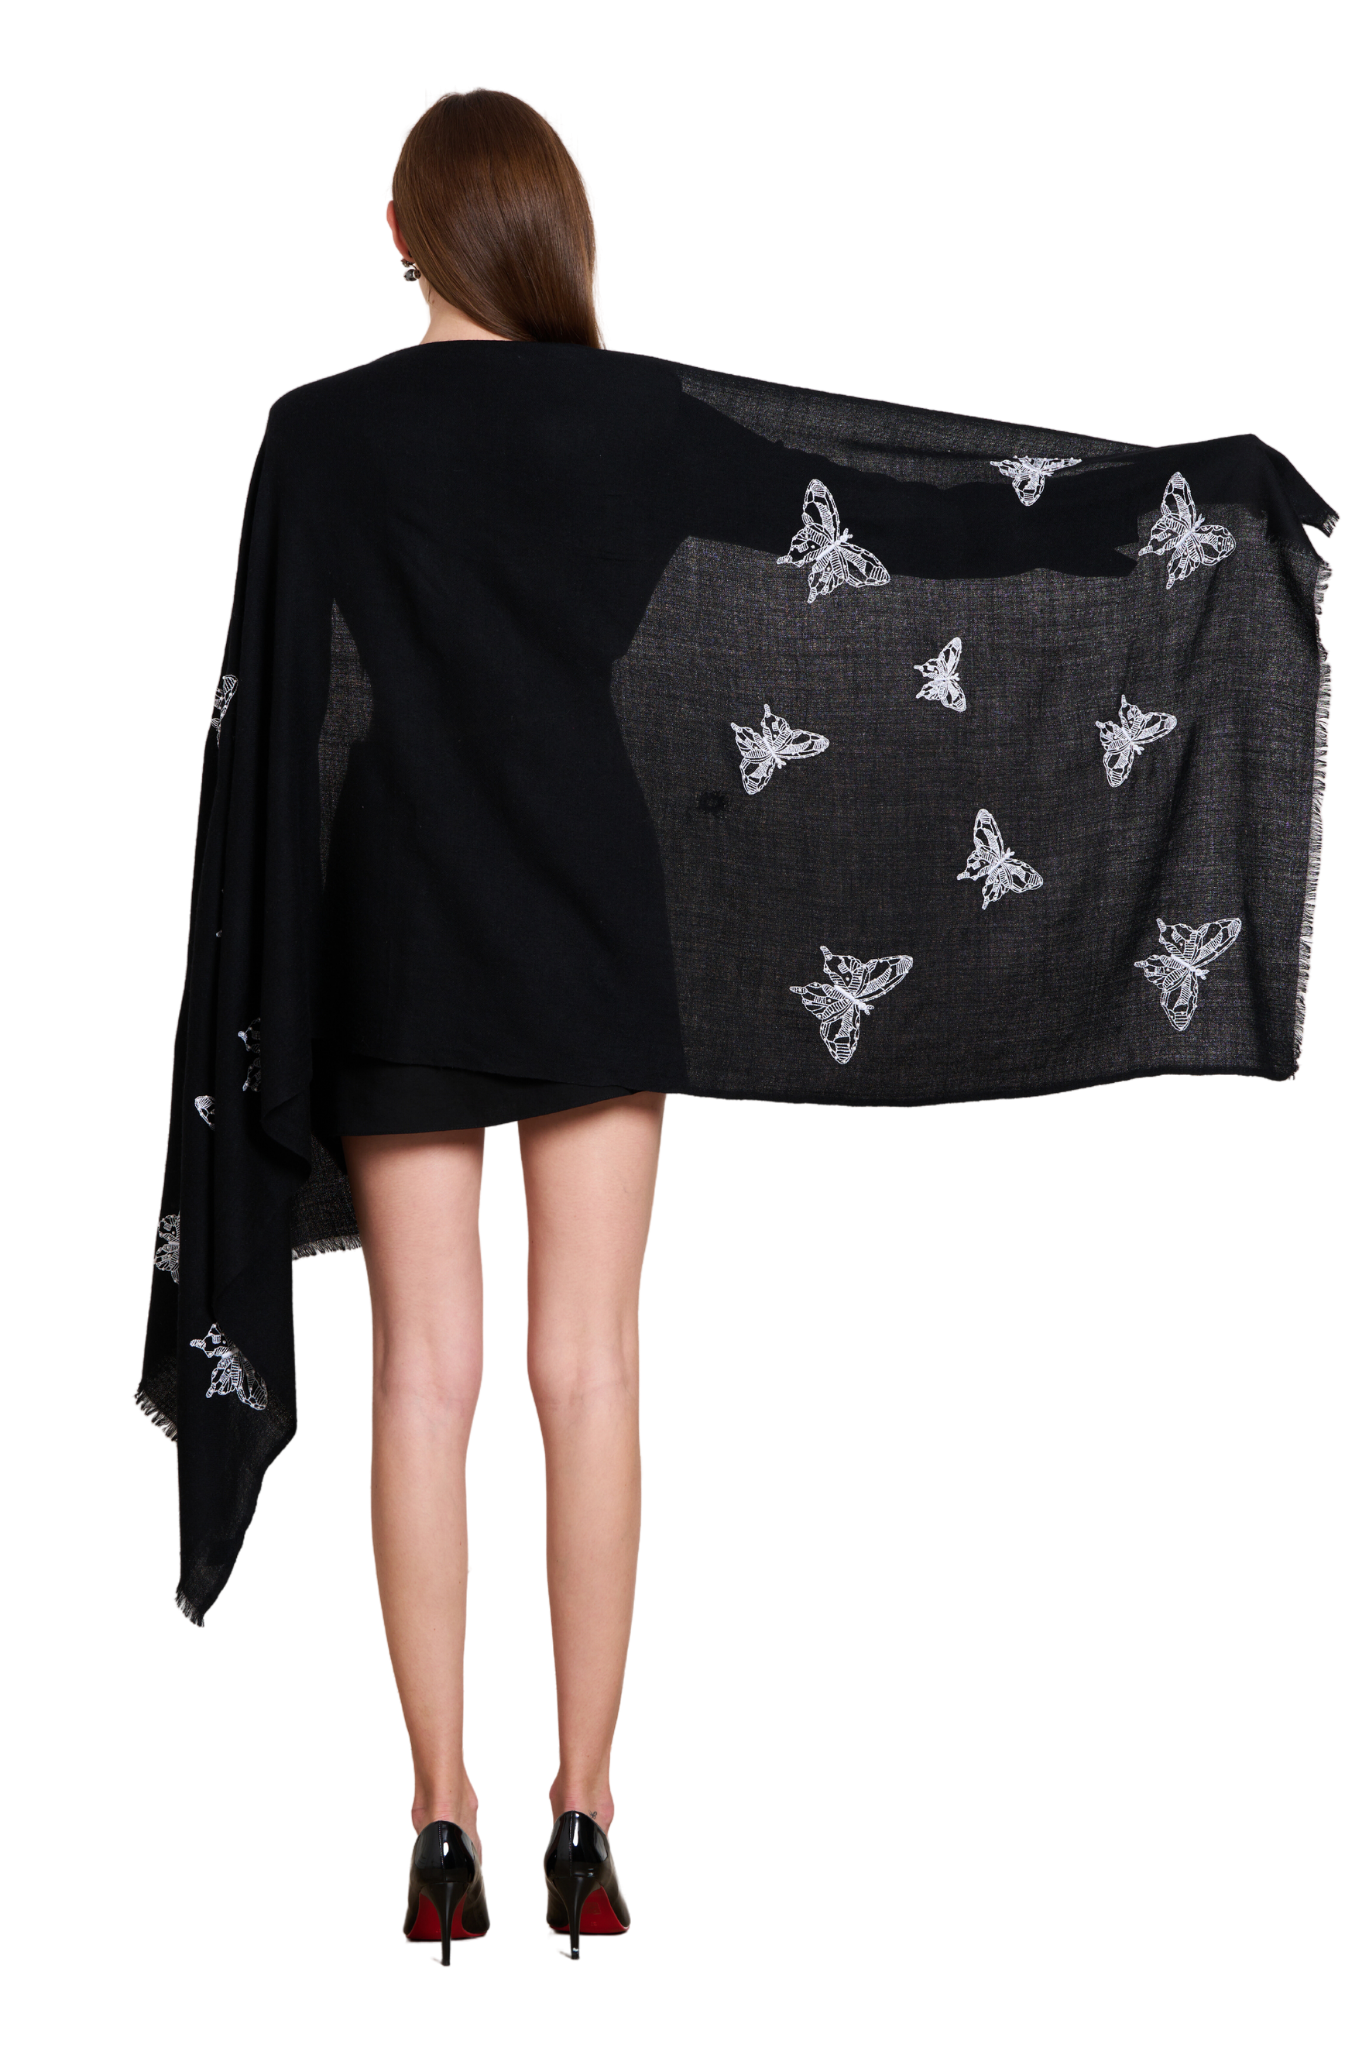 Homing Butterflies Cashmere Scarf